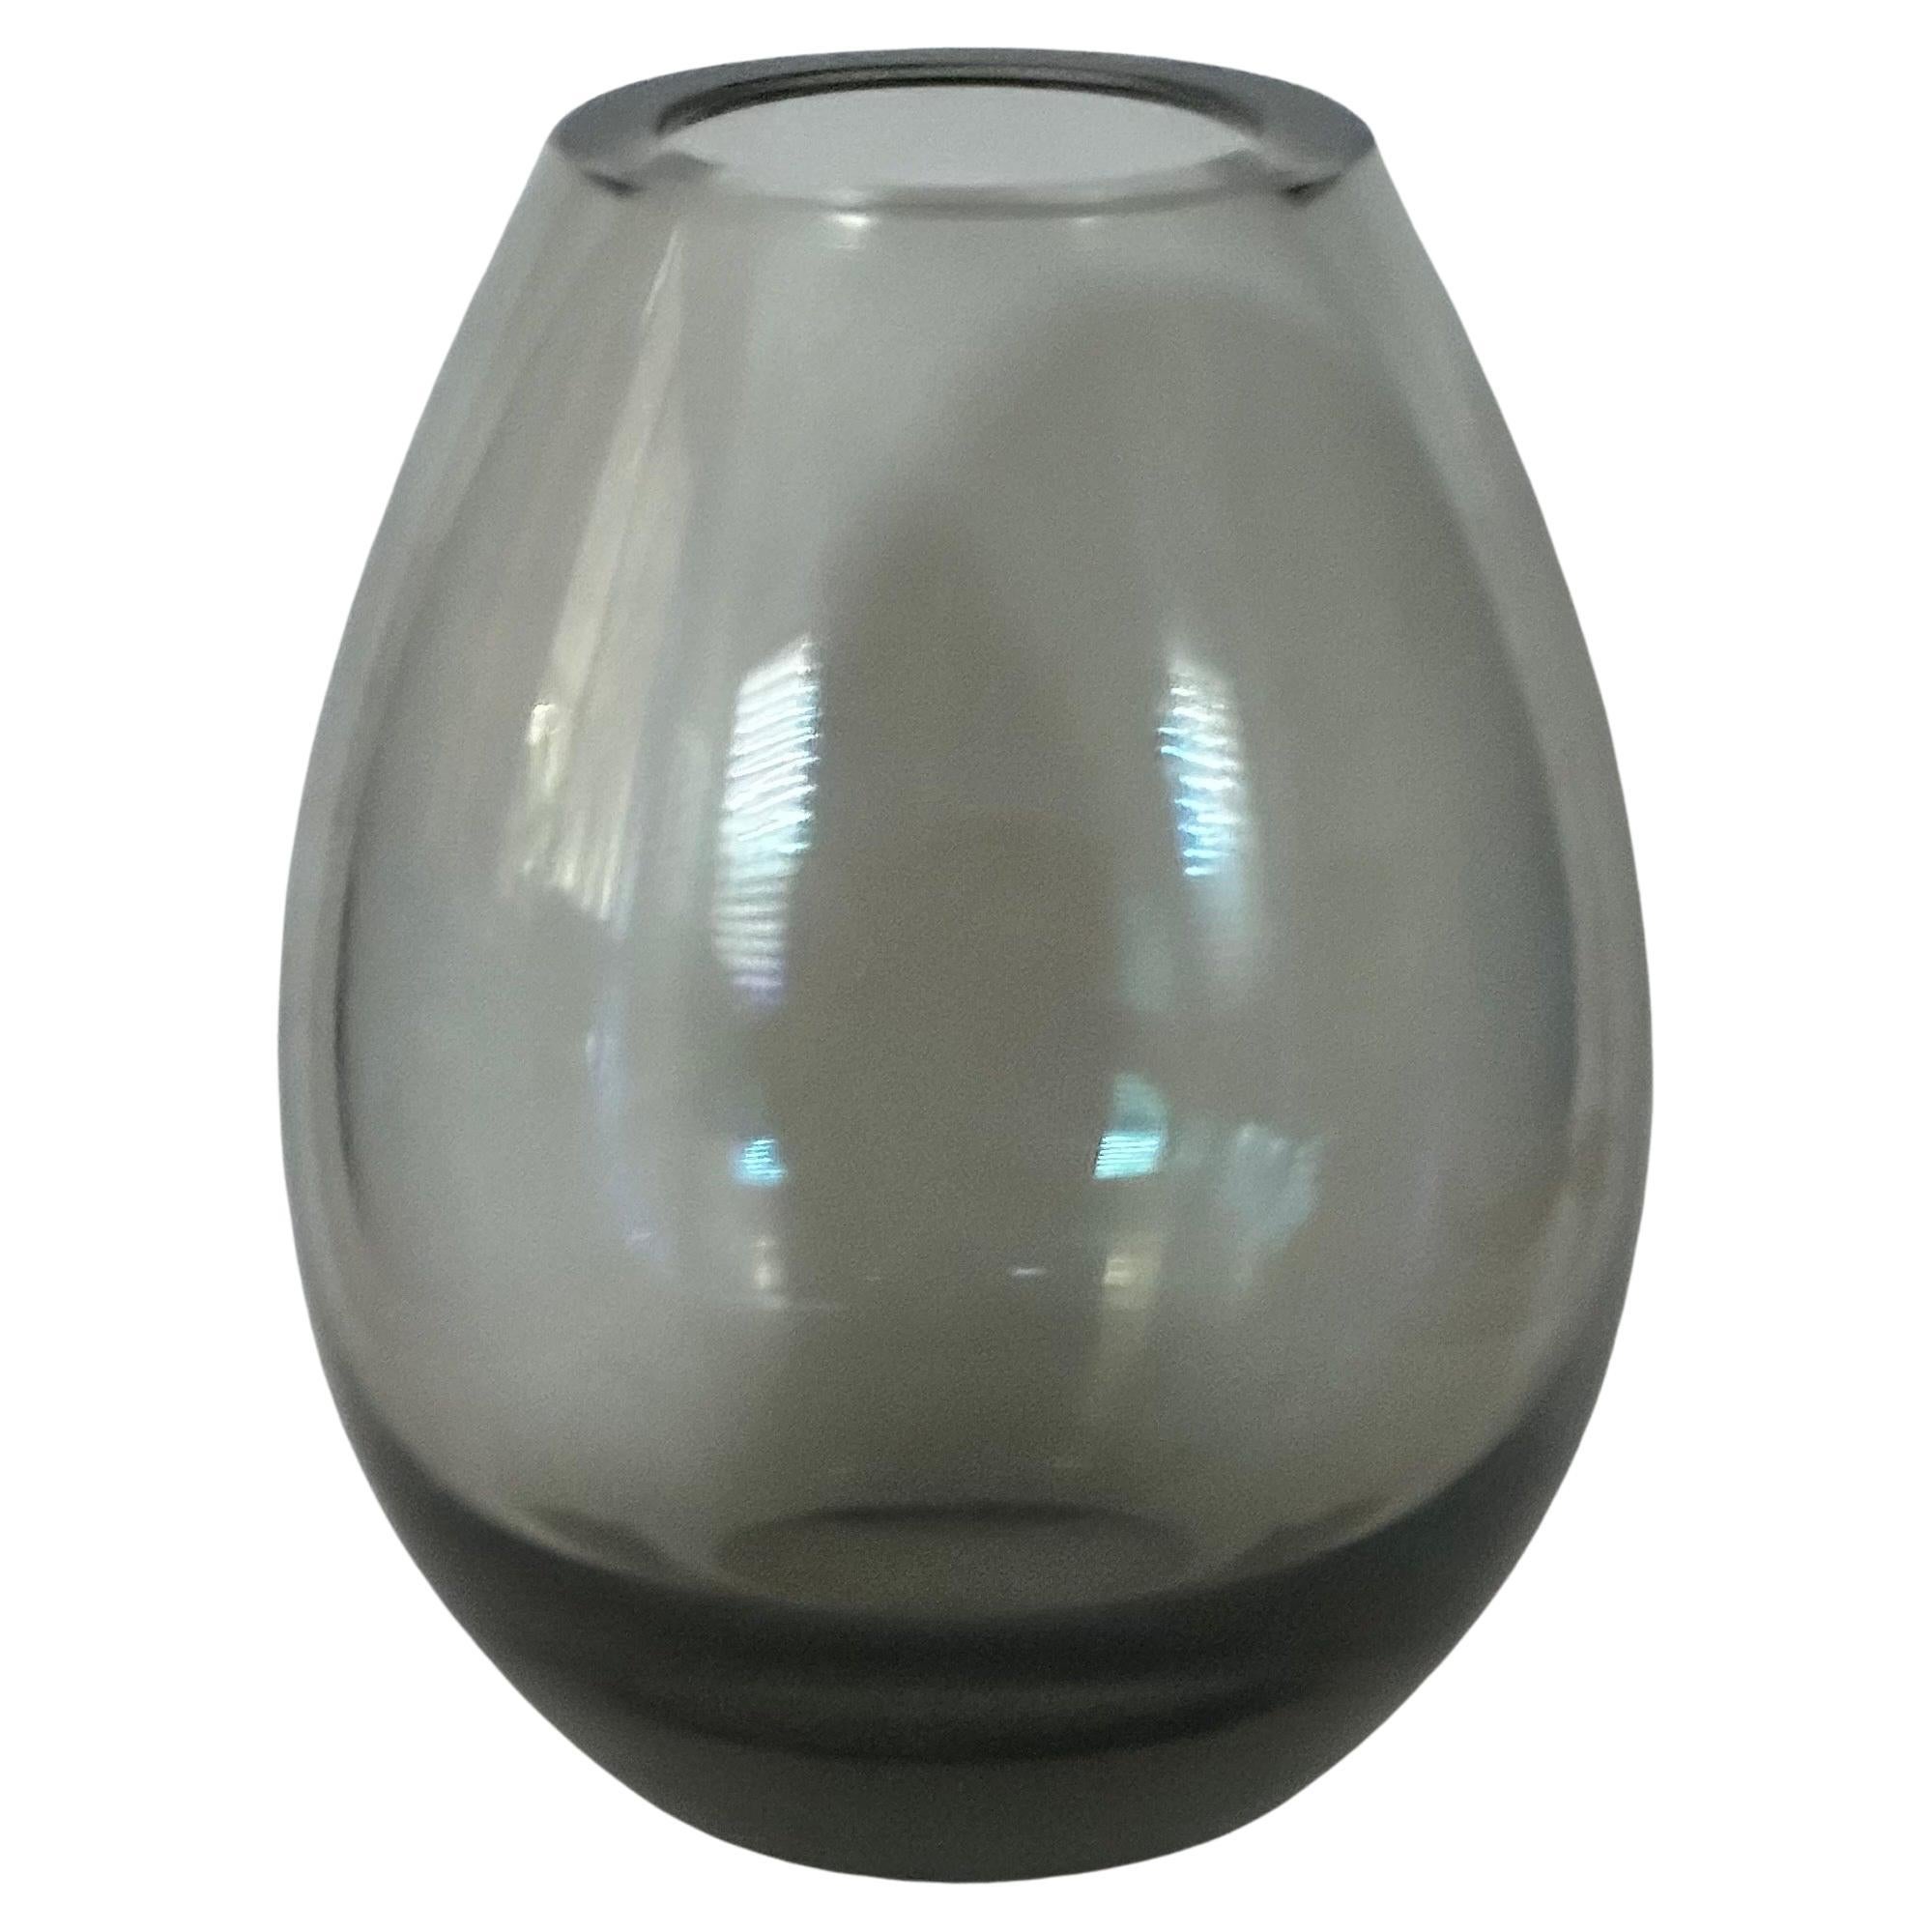 A very attractive small hand blown smoked glass vase by Per Lutken for Holmegaard, circa 1960s. The piece is in very good vintage condition with no chips or cracks (there are some minor scratches to the underside consistent with age and use) and